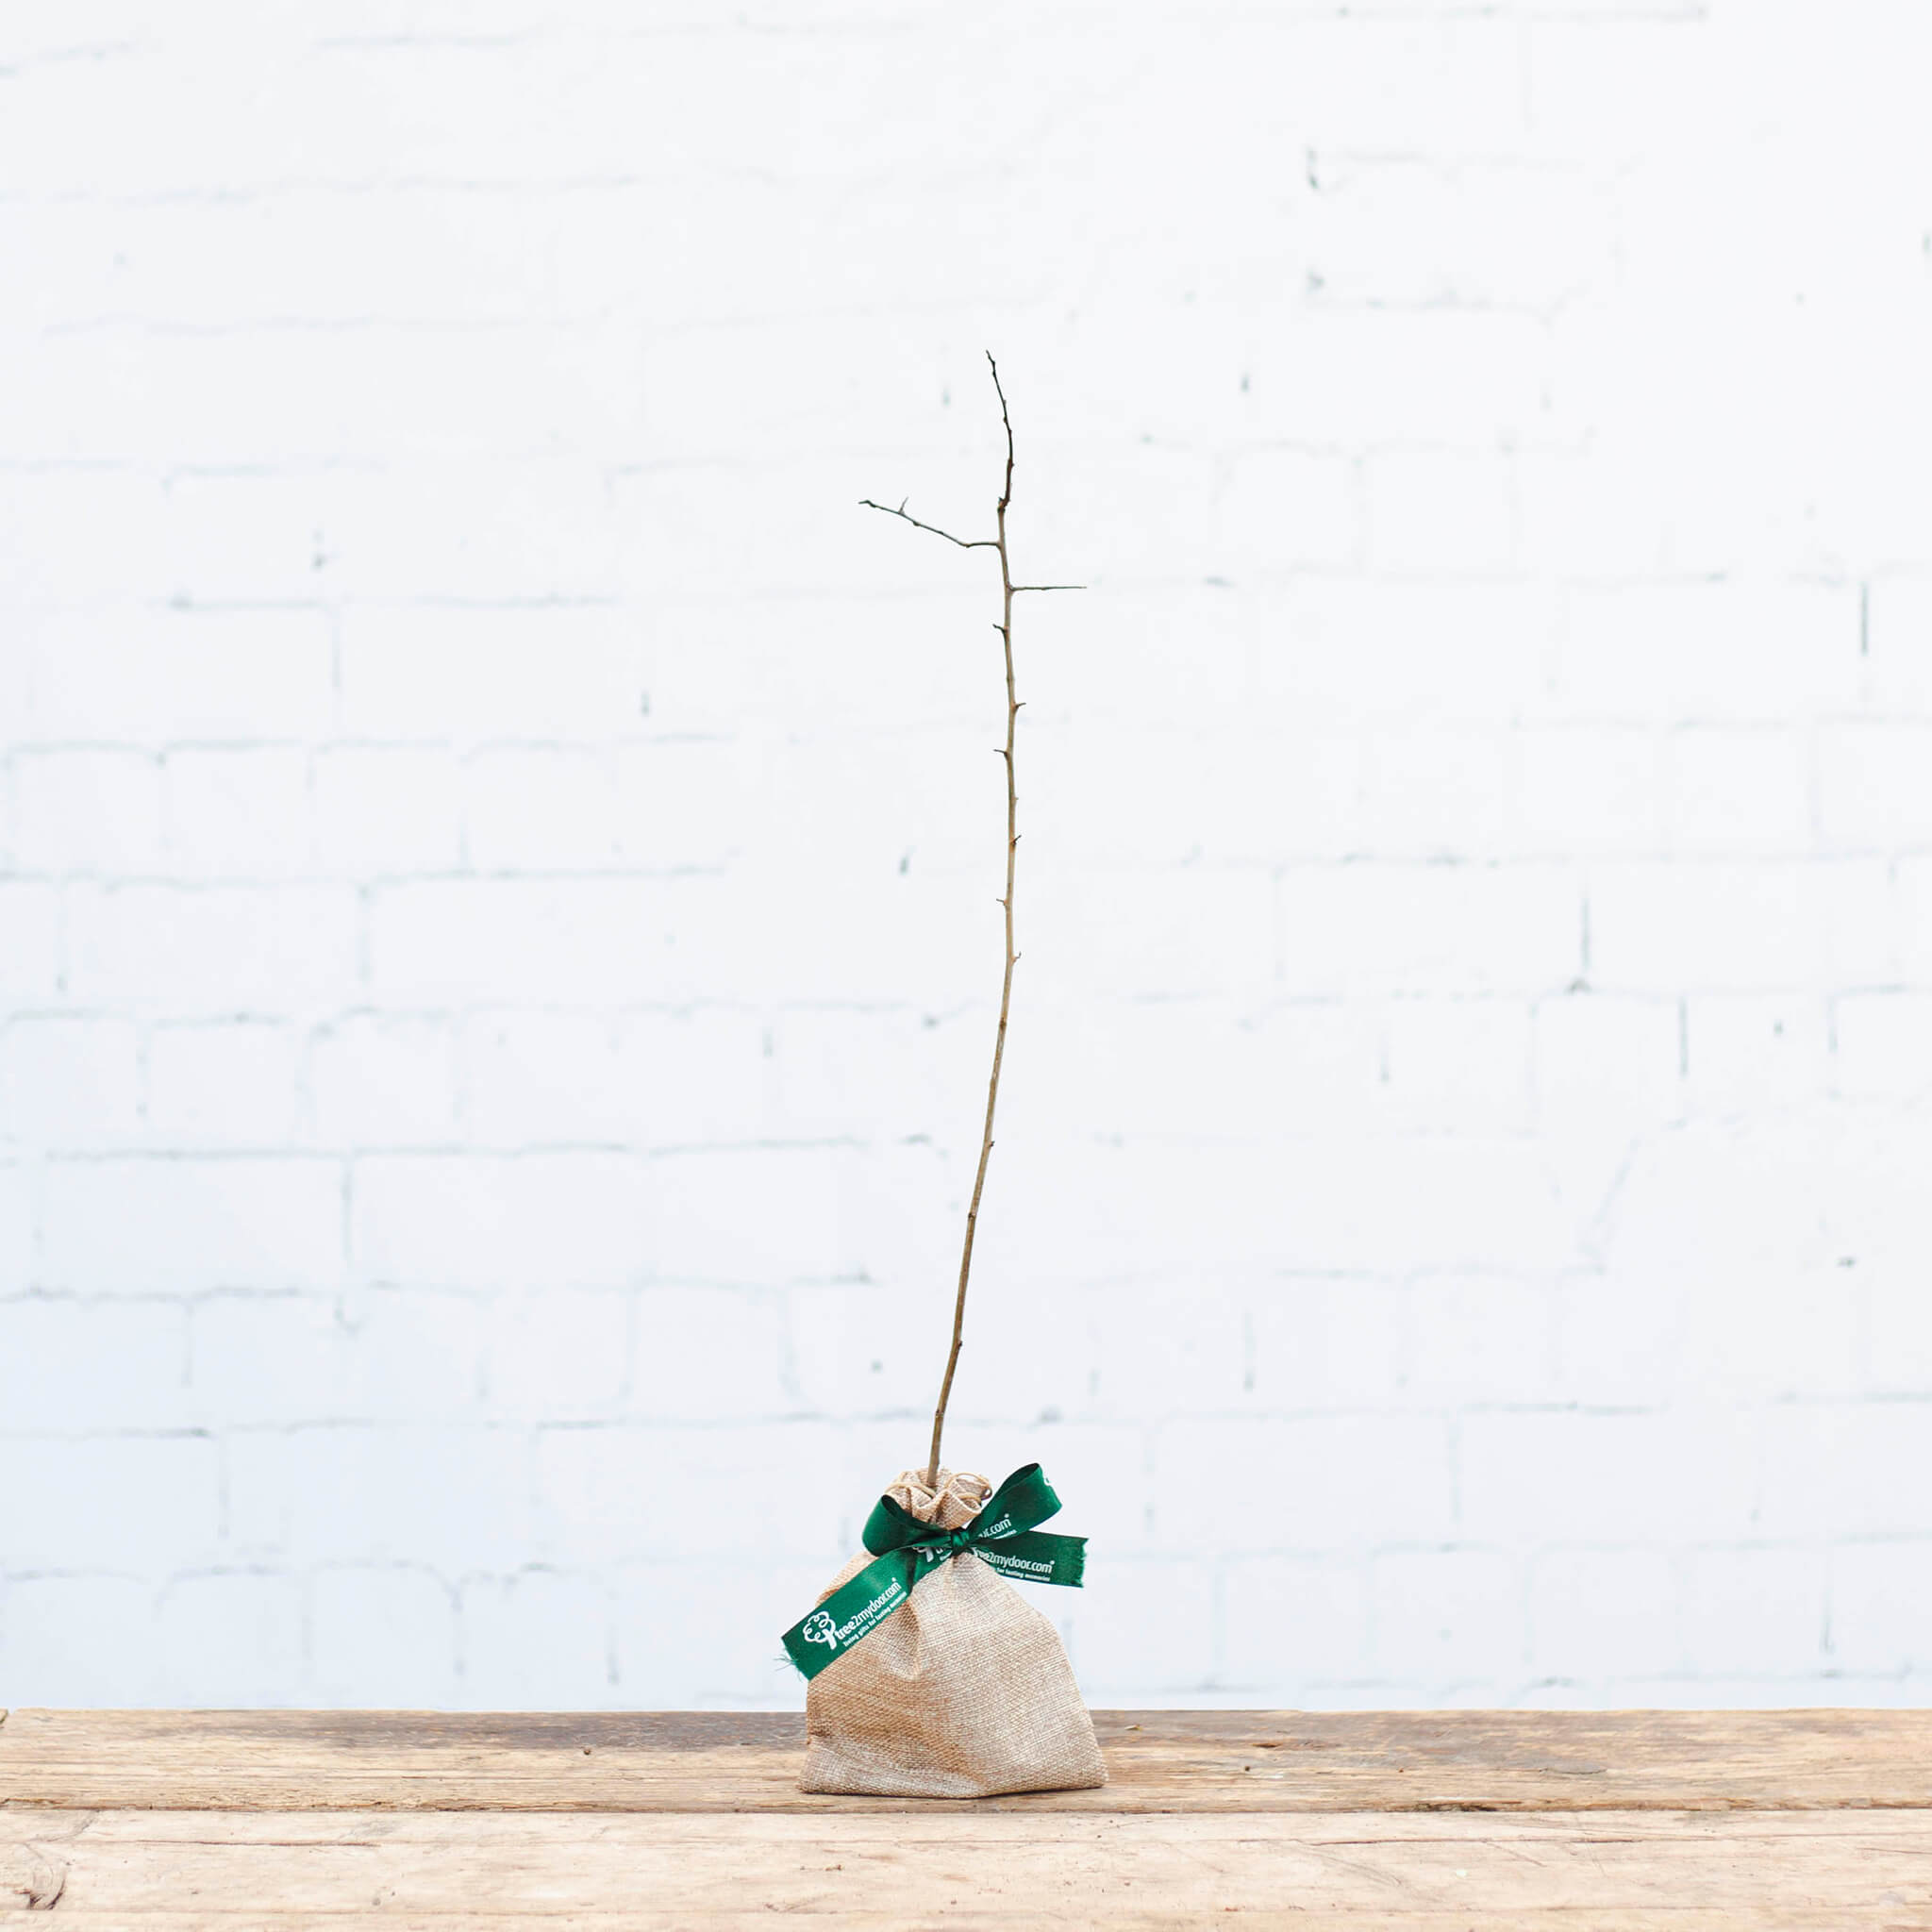 image of a crab apple tree sapling with hessian wrap